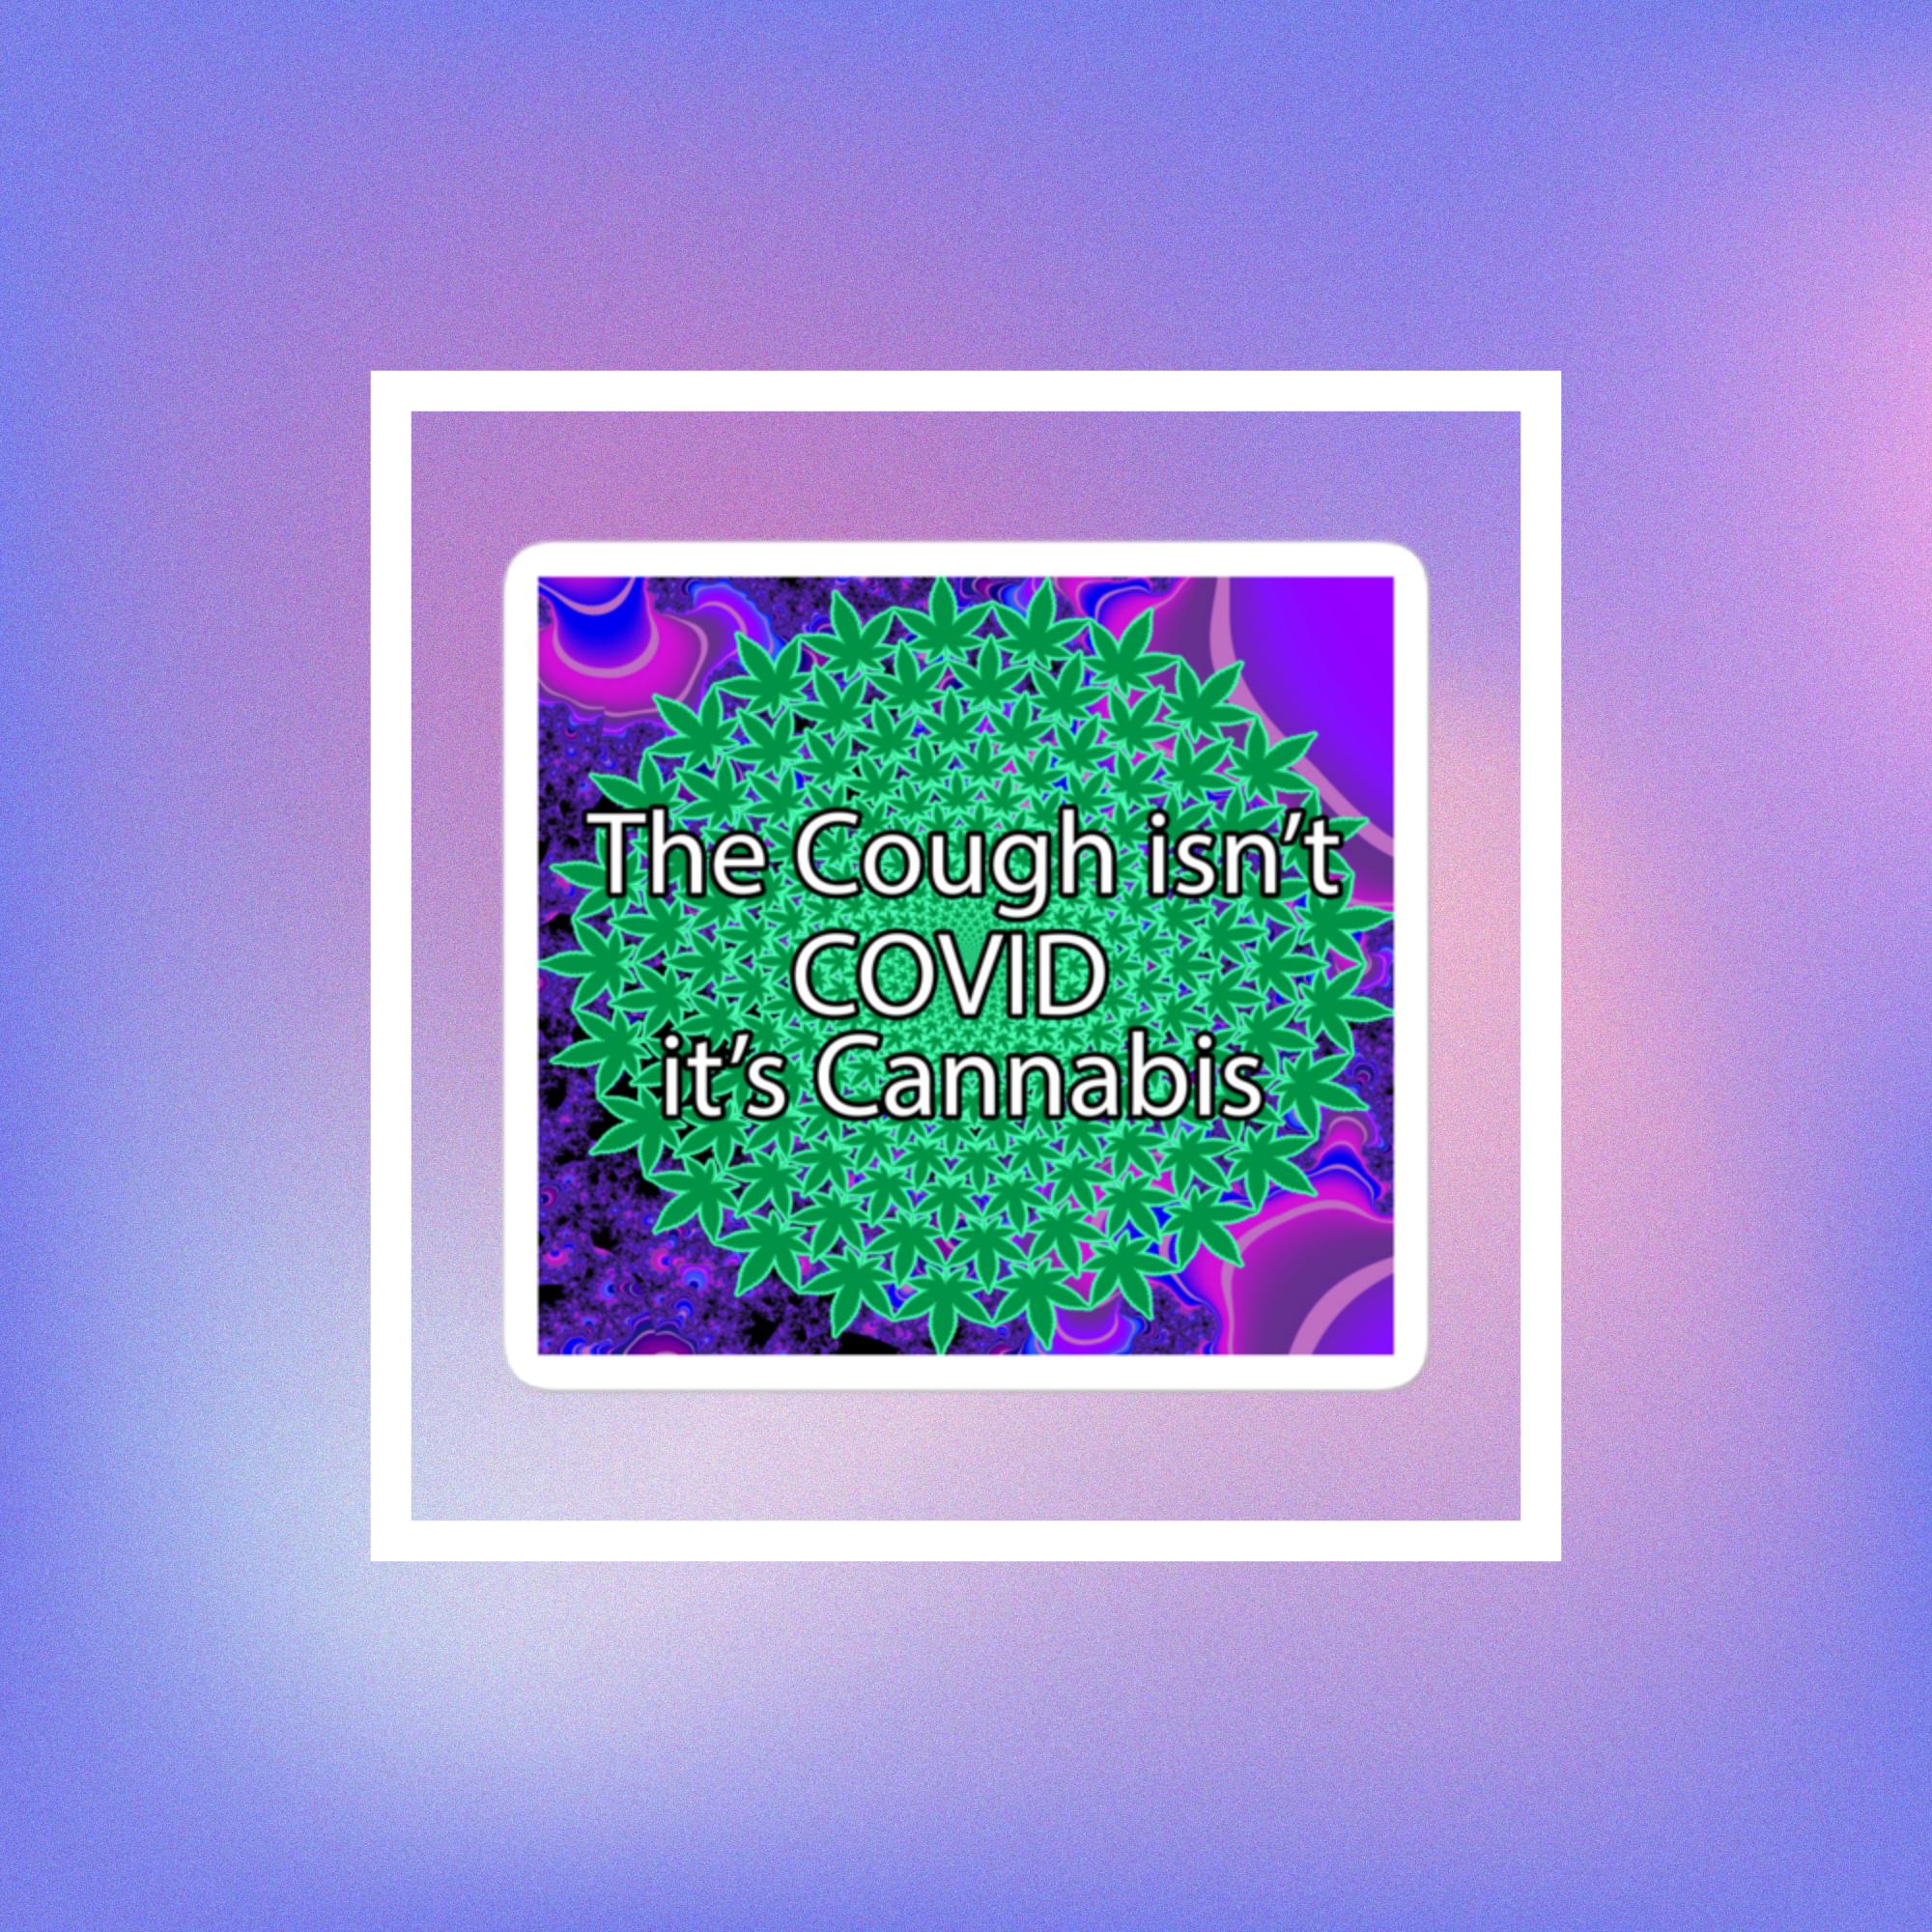 The Cough isn't COVID it's Cannabis Marijuana Pot Weed Bubble-free stickers white 3x3 inches